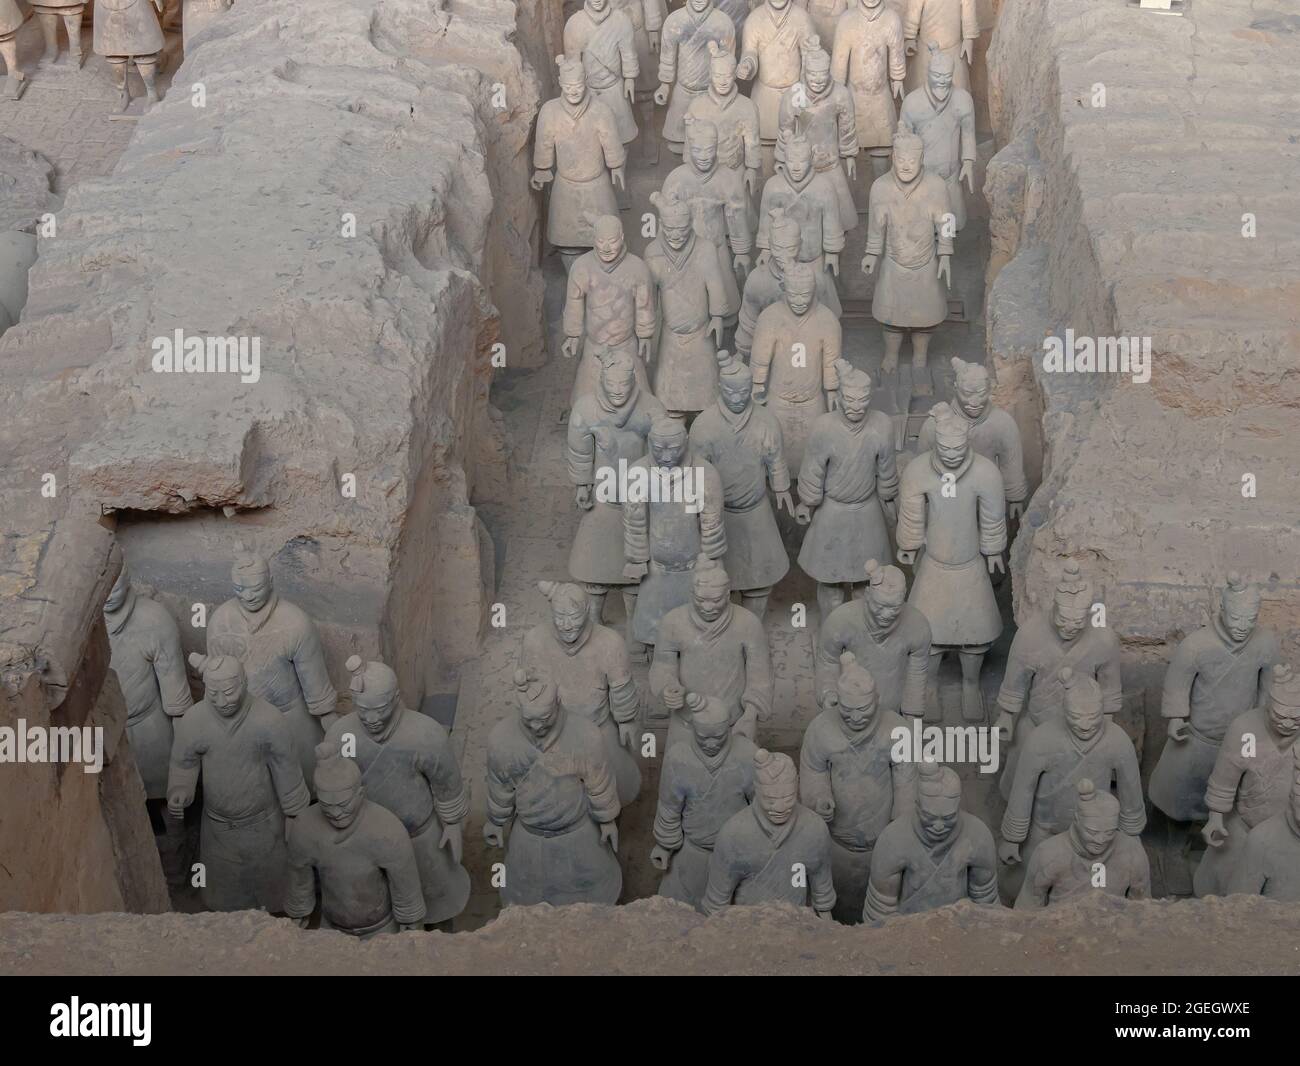 Terracotta soldiers in the tomb of the first emporer of the Qin dynasty of the terracotta warriors at Lintong County, Shaanxi, Xi'an, China, Asia Stock Photo